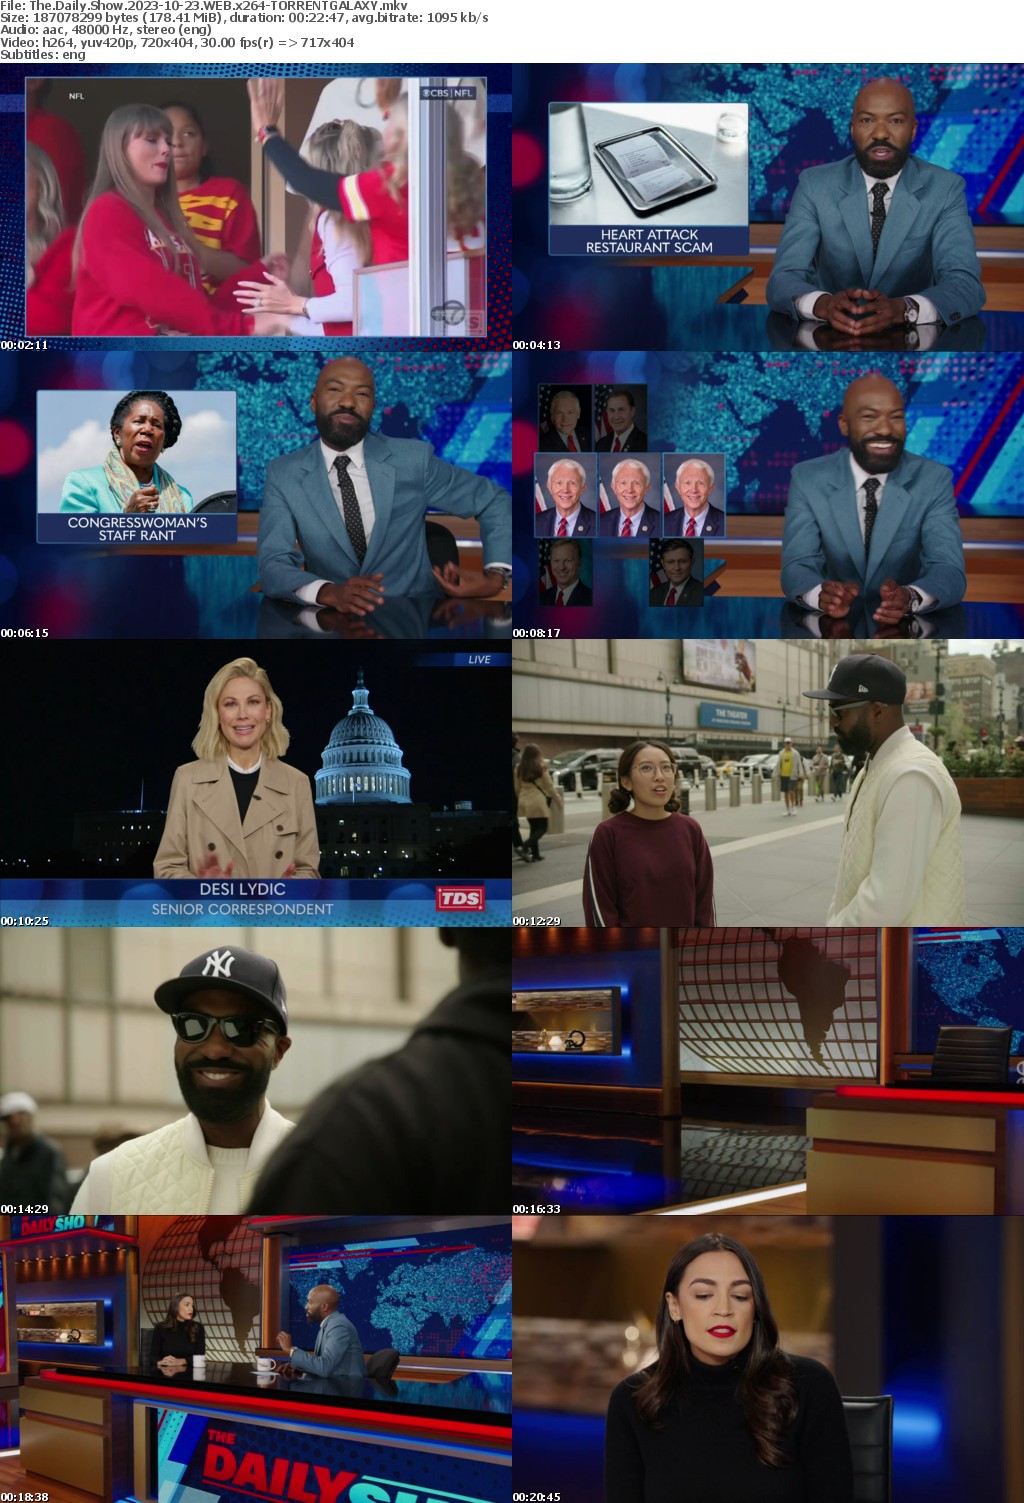 The Daily Show 2023-10-23 WEB x264-GALAXY